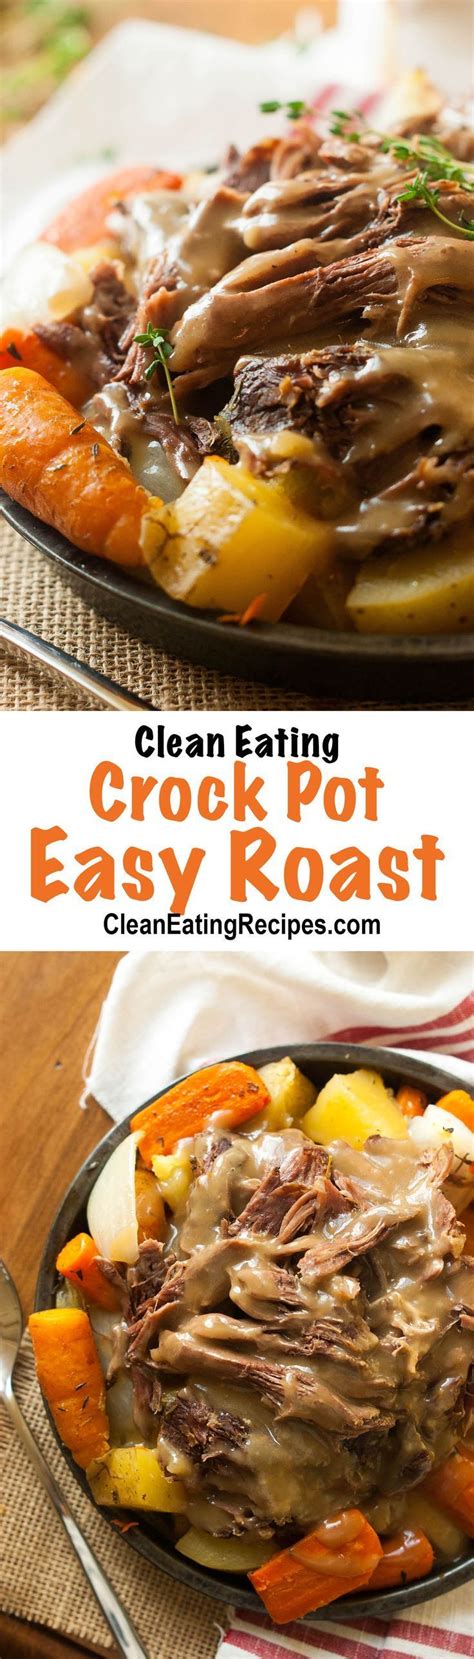 The smell of the cooking roast from the crock pot is incredible! Easy Paleo Crock Pot Roast Recipe with Gravy & Video {Gluten-Free, Clean Eating, Dairy-Free ...